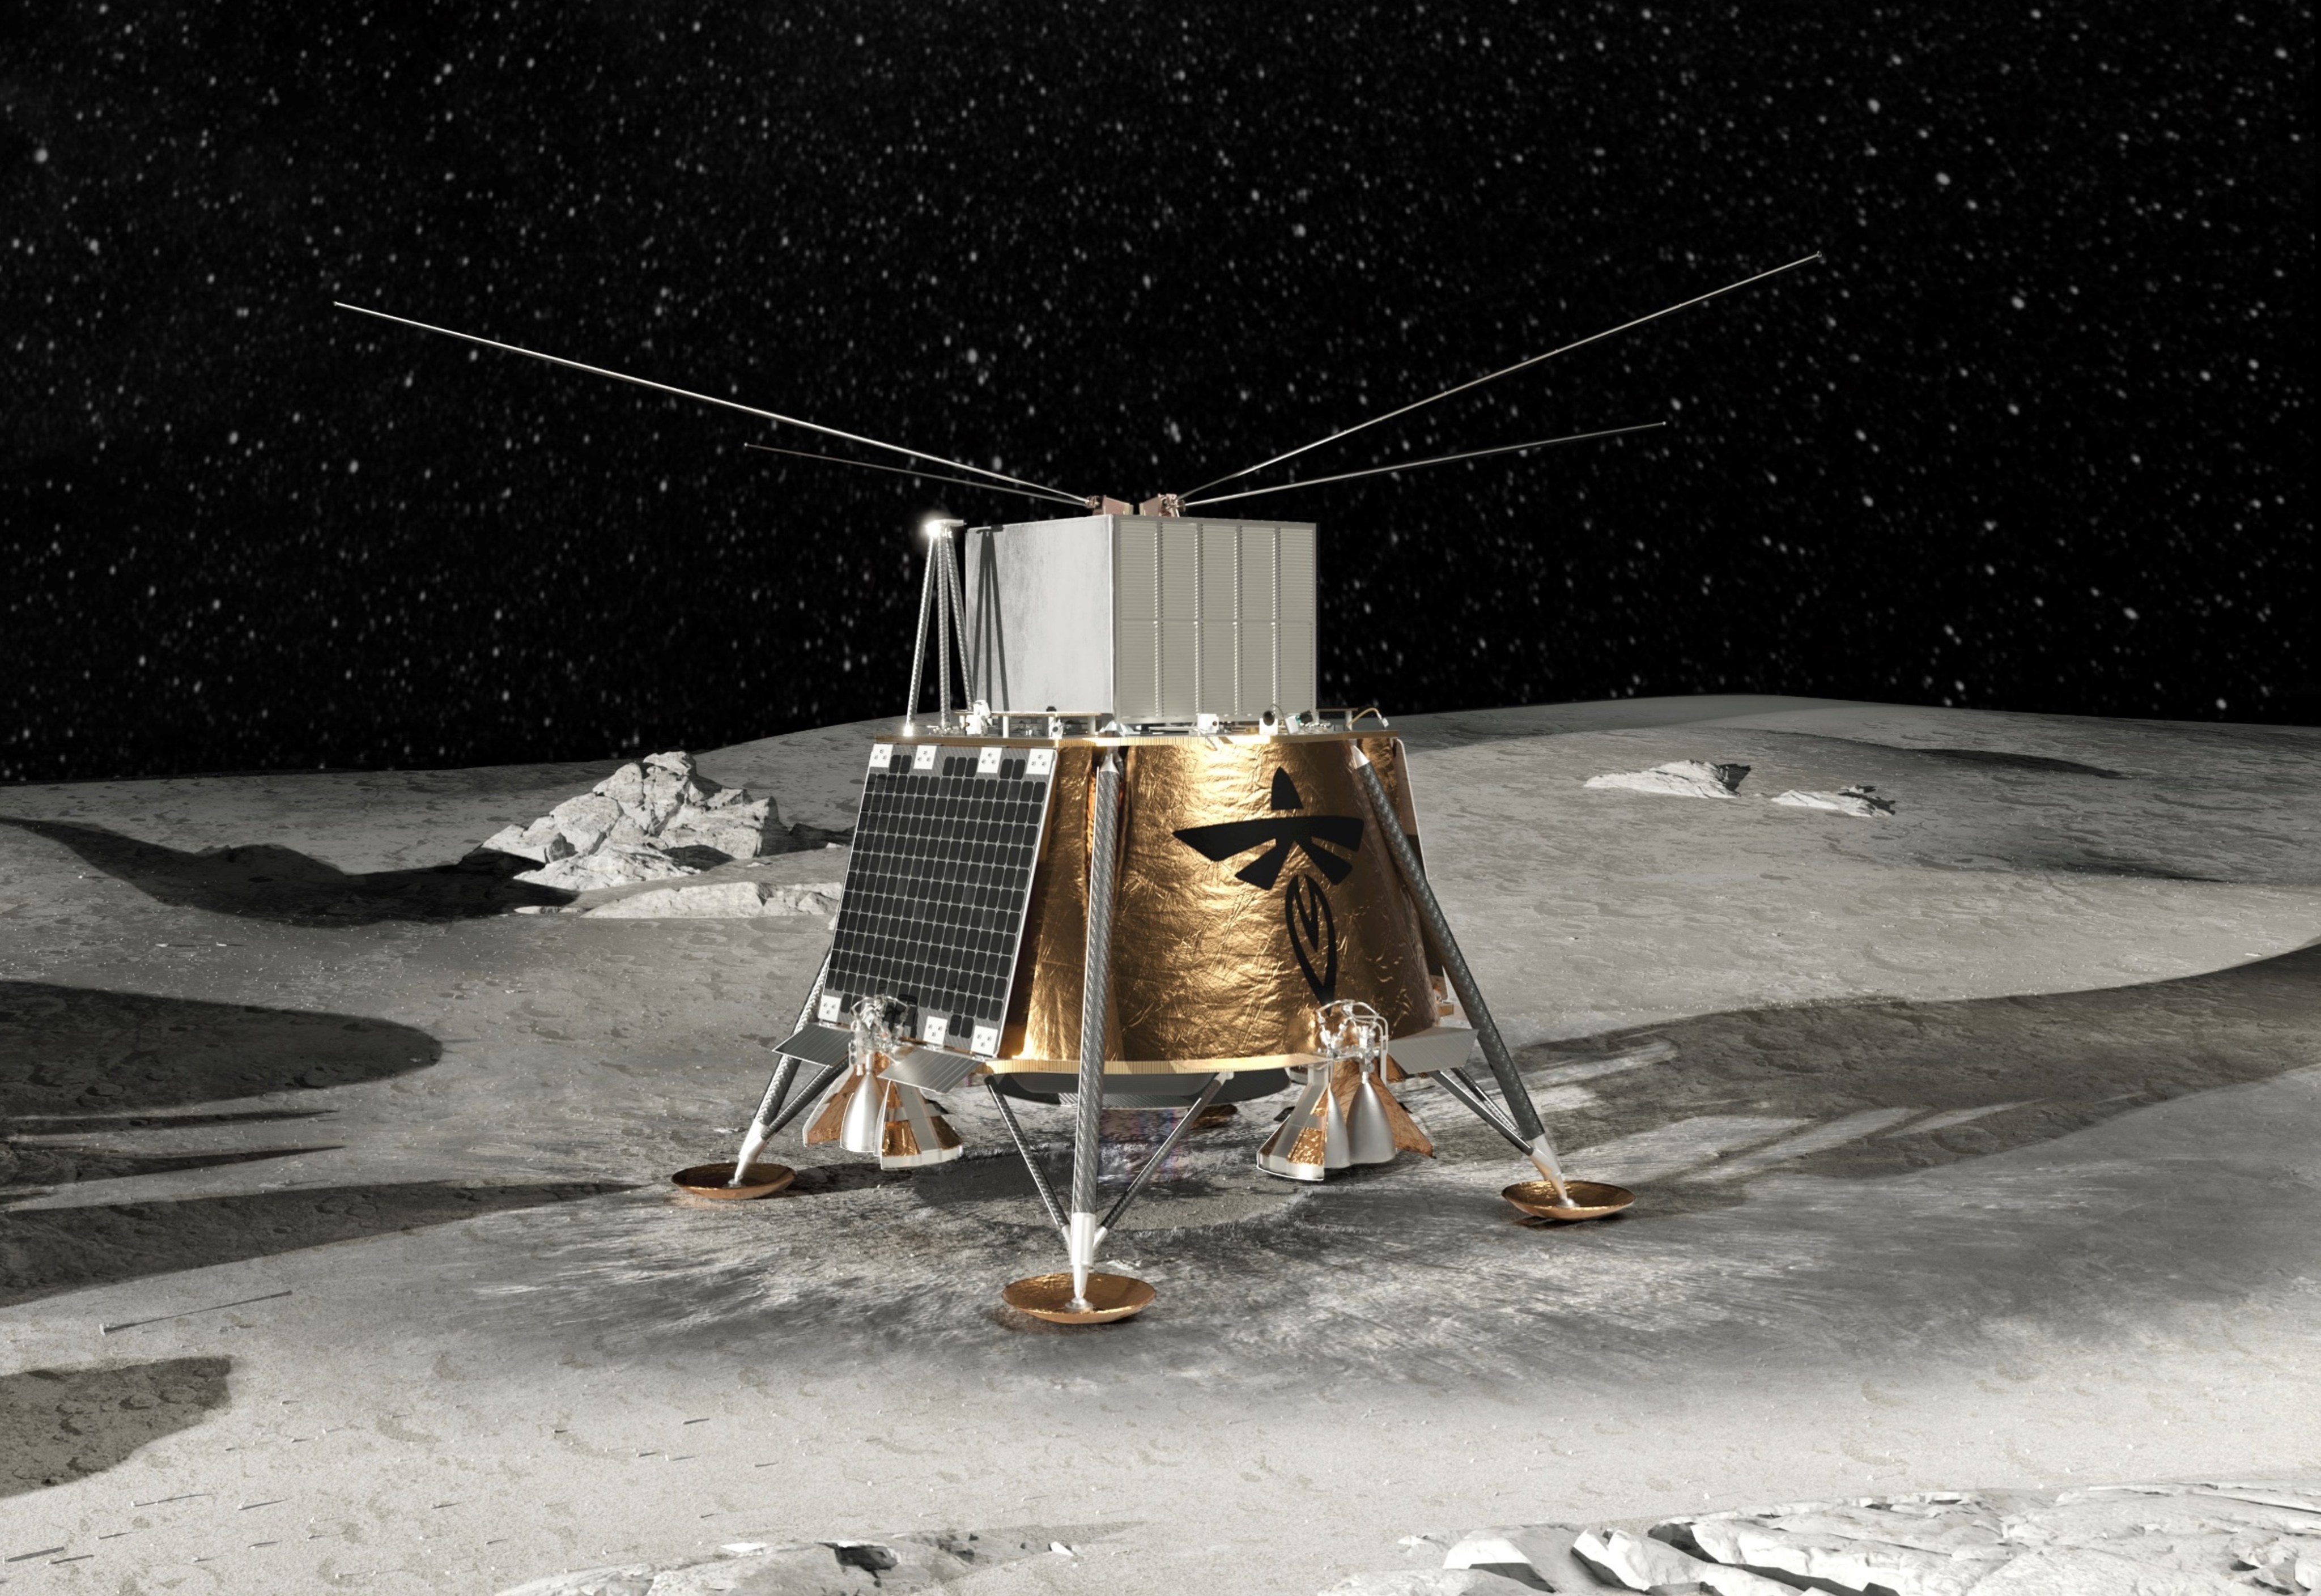 A rendering of Firefly's Blue Ghost 2 lunar lander on the surface of the Moon.